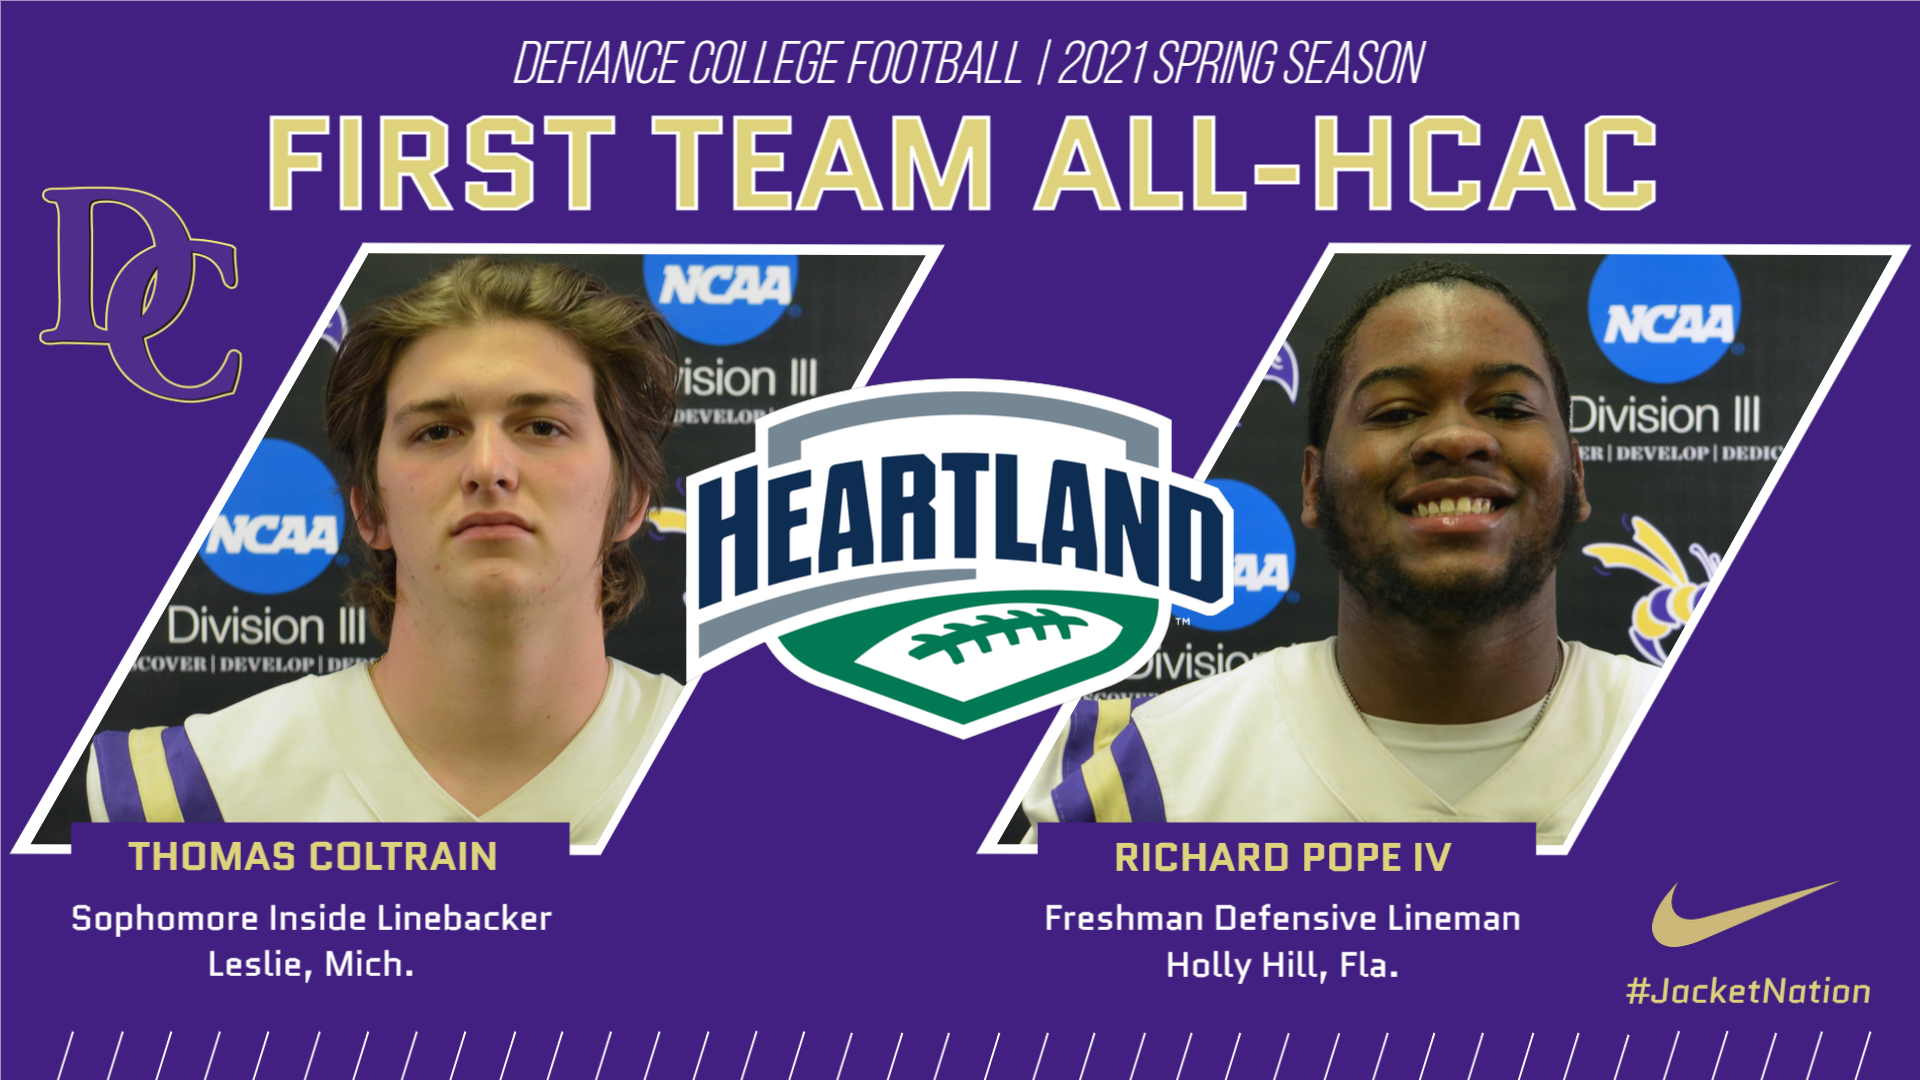 Eleven football players earn All-HCAC recognition with Coltrain, Pope named first team